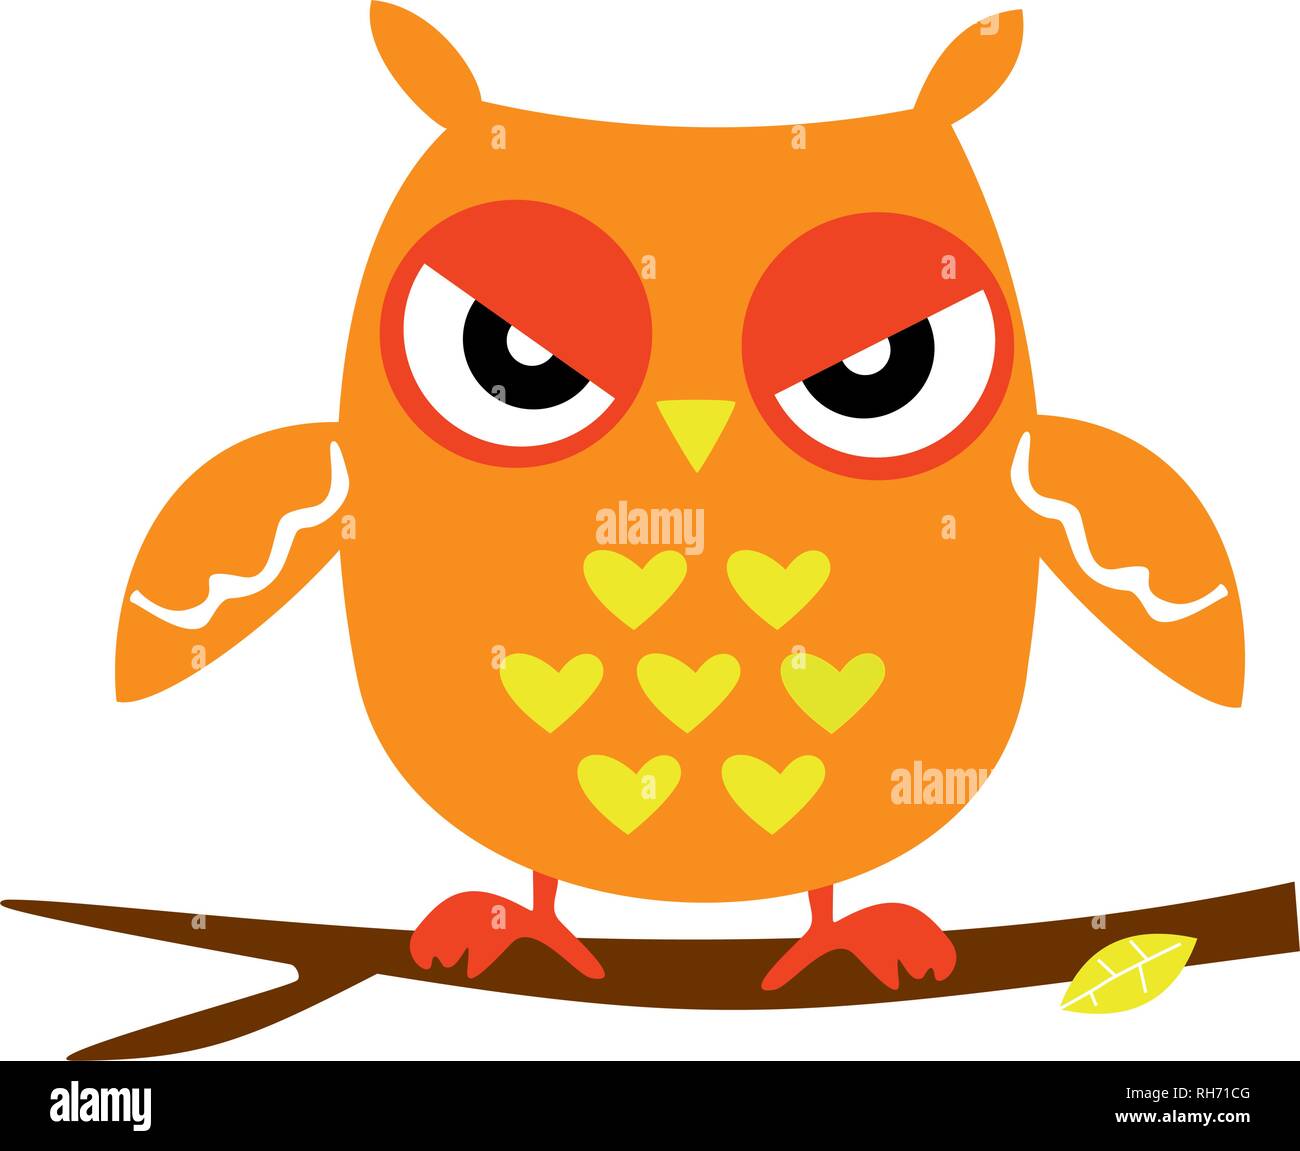 Orange Owl Sitting on a Branch, Abstract Background, Cartoon Character Isolated on White Vector Illustration EPS 10 Stock Vector